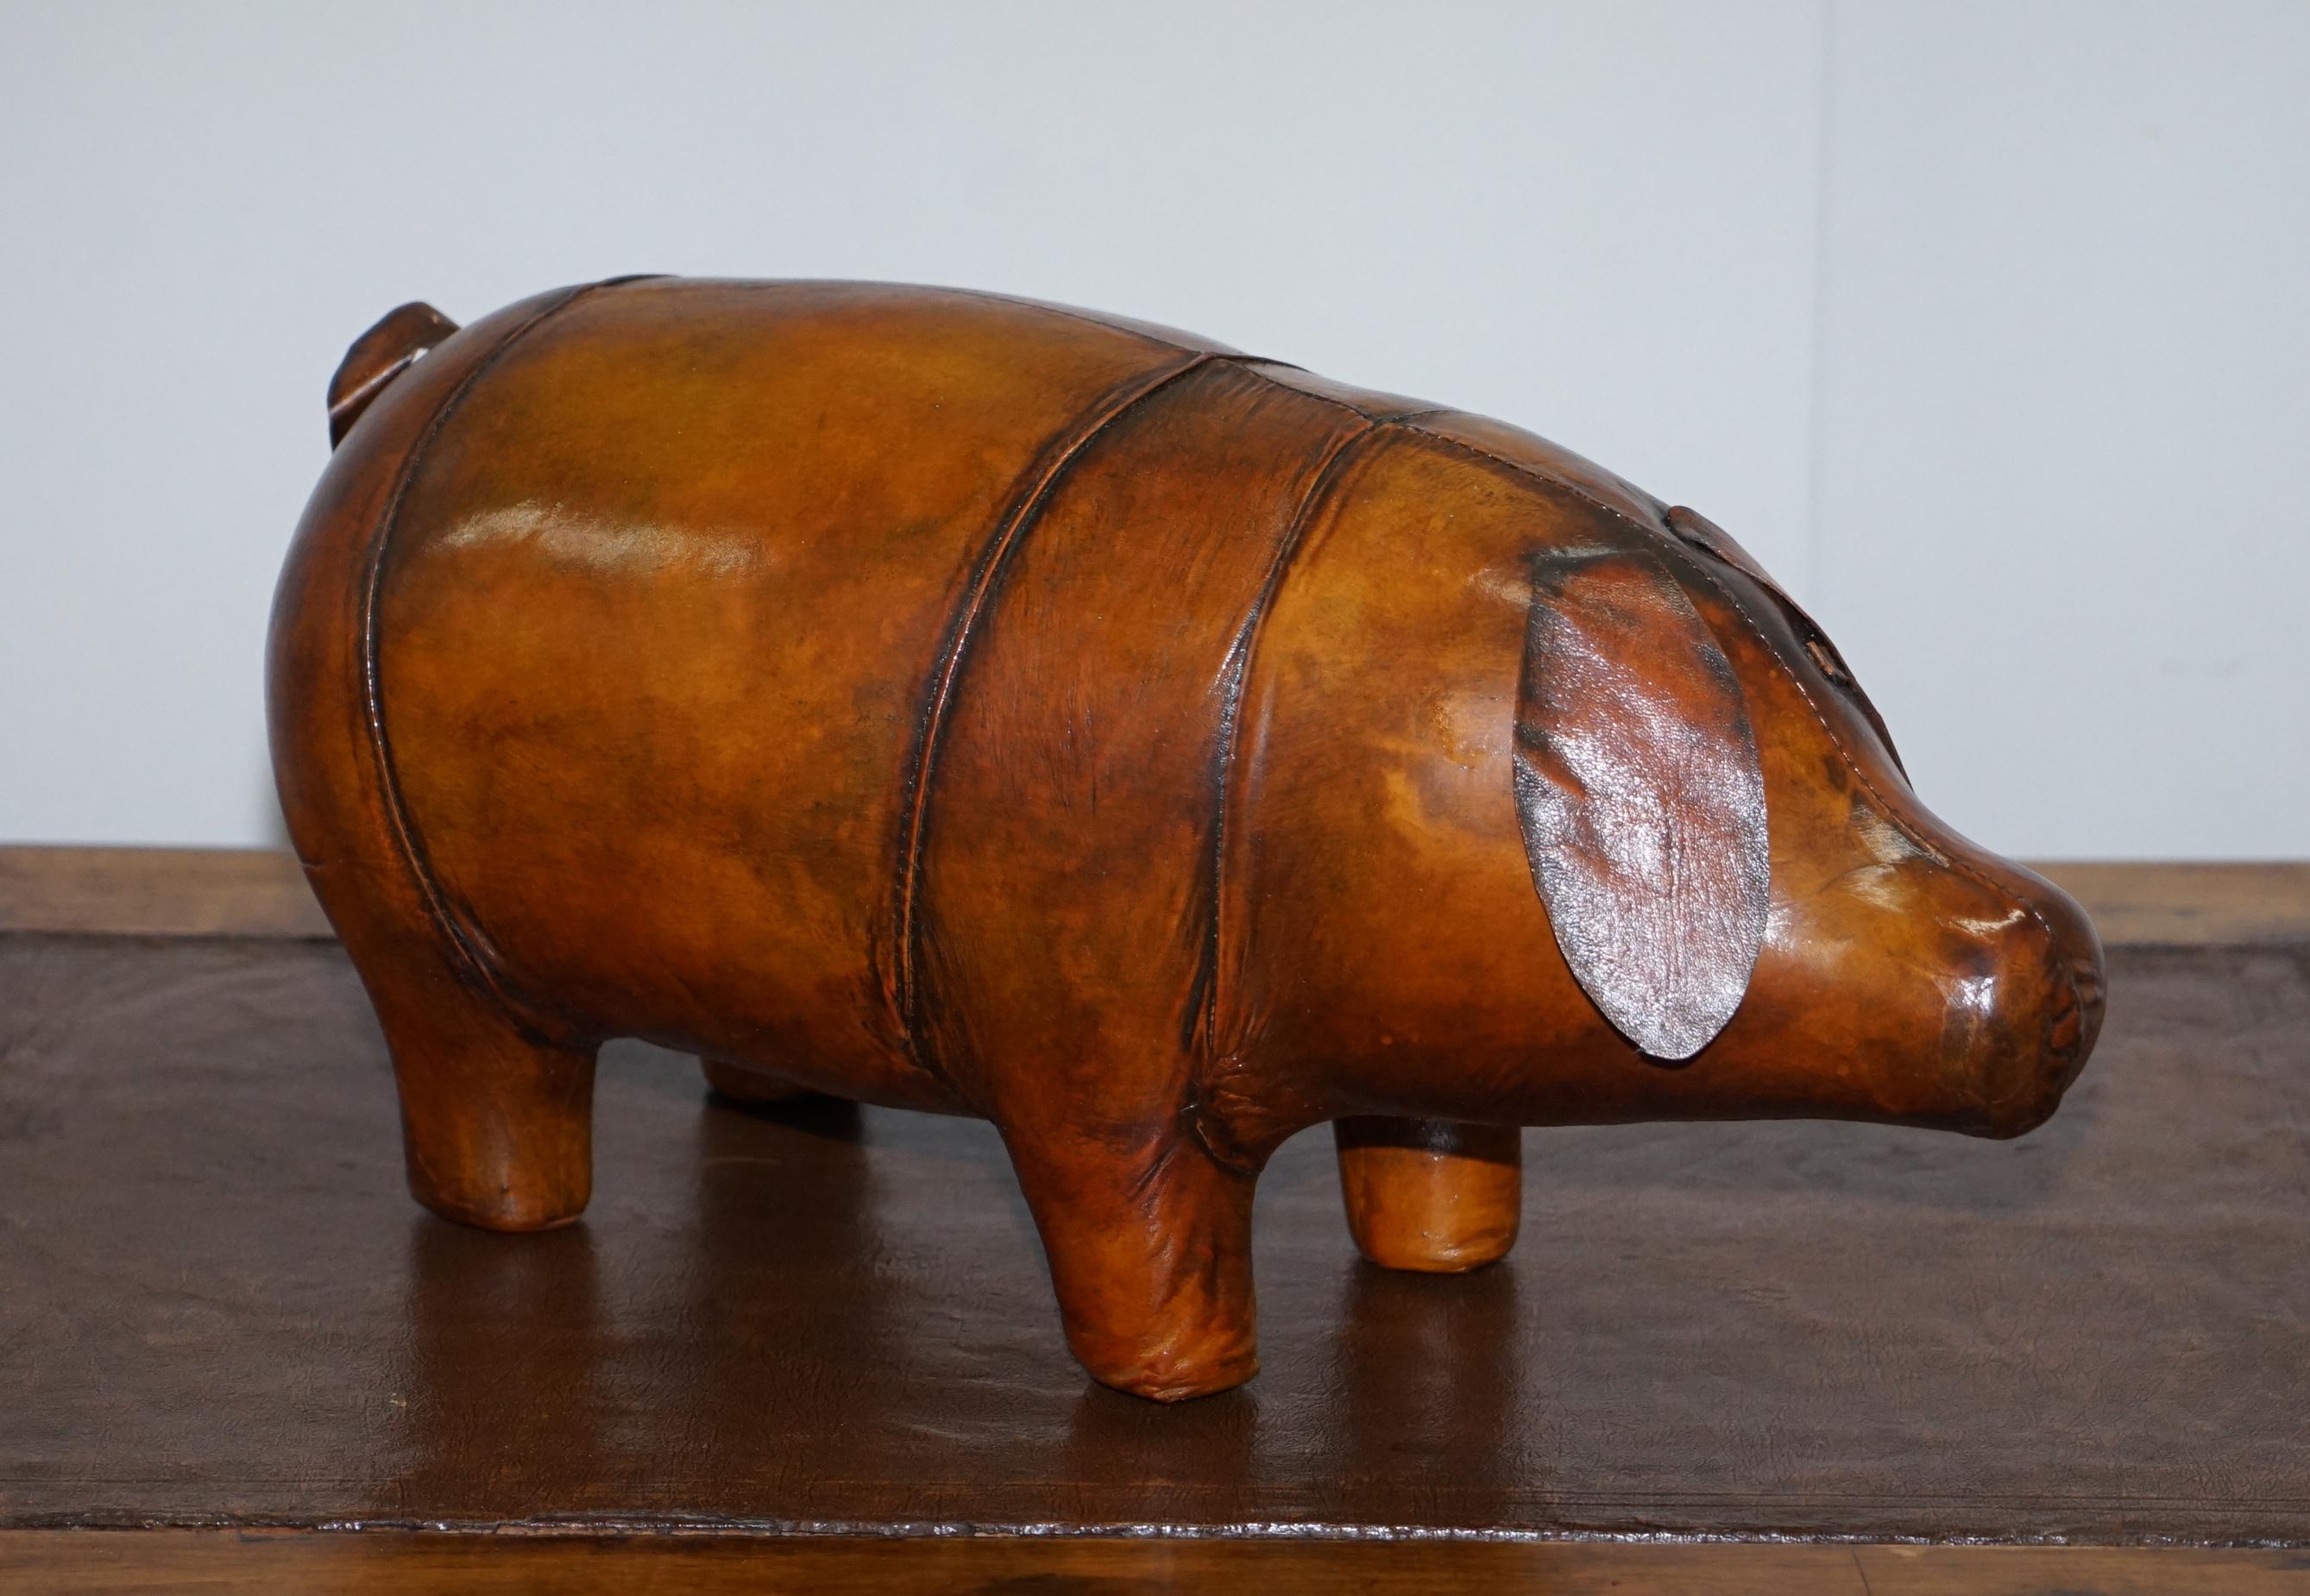 We are delighted to offer 1 of 3 absolutely sublime new old stock original Liberty’s London Omersa brown leather land dyed pig footstools

This listing is for one with the option to buy up to three 

These come in varying sizes there is a quite